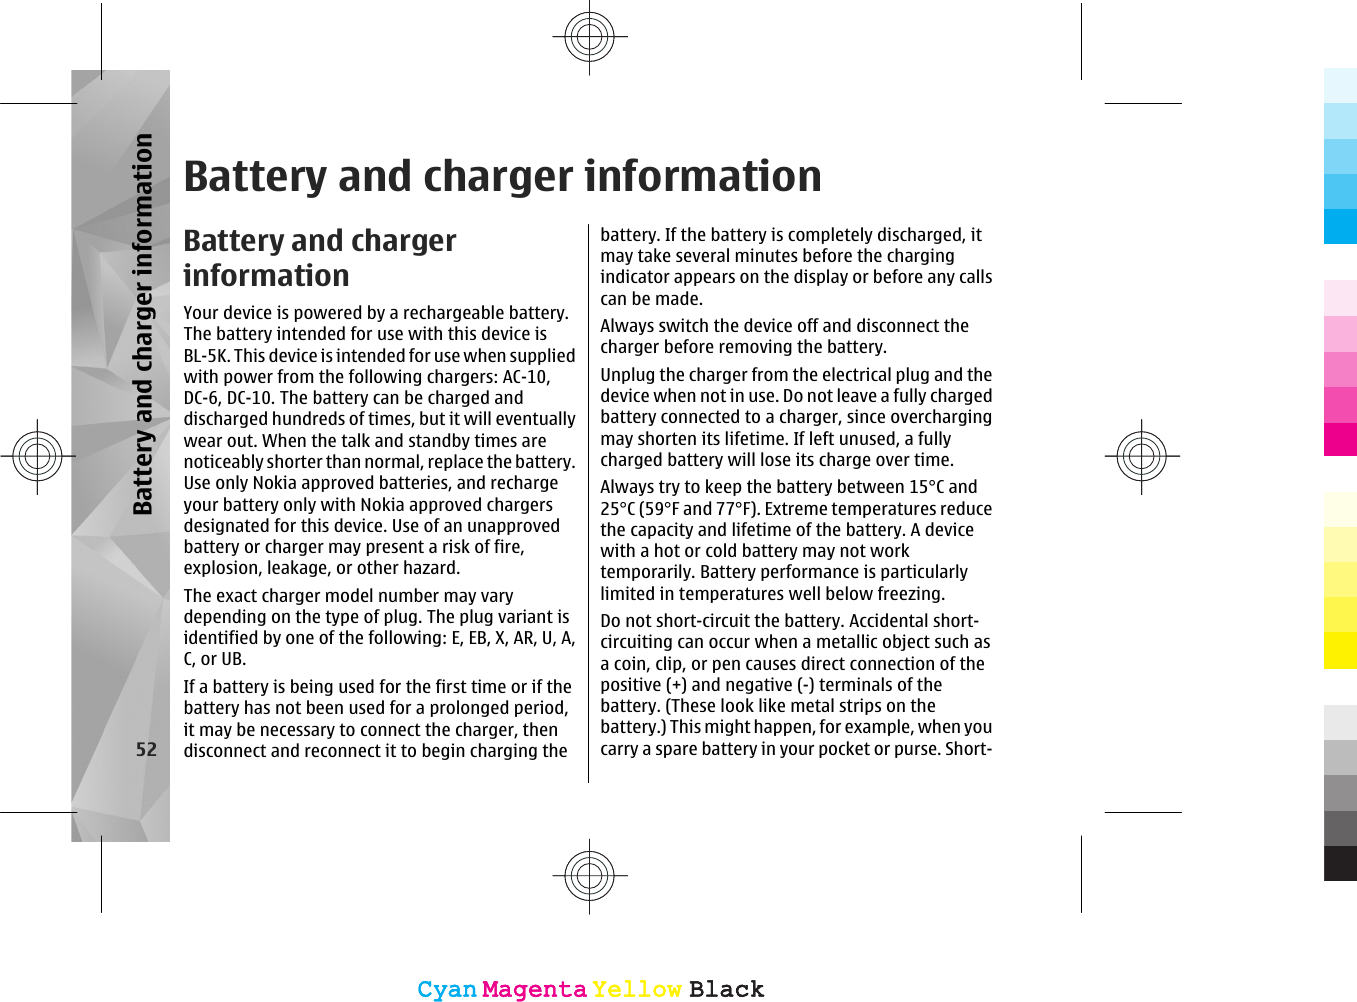 Battery and charger informationBattery and chargerinformationYour device is powered by a rechargeable battery.The battery intended for use with this device isBL-5K. This device is intended for use when suppliedwith power from the following chargers: AC-10,DC-6, DC-10. The battery can be charged anddischarged hundreds of times, but it will eventuallywear out. When the talk and standby times arenoticeably shorter than normal, replace the battery.Use only Nokia approved batteries, and rechargeyour battery only with Nokia approved chargersdesignated for this device. Use of an unapprovedbattery or charger may present a risk of fire,explosion, leakage, or other hazard.The exact charger model number may varydepending on the type of plug. The plug variant isidentified by one of the following: E, EB, X, AR, U, A,C, or UB.If a battery is being used for the first time or if thebattery has not been used for a prolonged period,it may be necessary to connect the charger, thendisconnect and reconnect it to begin charging thebattery. If the battery is completely discharged, itmay take several minutes before the chargingindicator appears on the display or before any callscan be made.Always switch the device off and disconnect thecharger before removing the battery.Unplug the charger from the electrical plug and thedevice when not in use. Do not leave a fully chargedbattery connected to a charger, since overchargingmay shorten its lifetime. If left unused, a fullycharged battery will lose its charge over time.Always try to keep the battery between 15°C and25°C (59°F and 77°F). Extreme temperatures reducethe capacity and lifetime of the battery. A devicewith a hot or cold battery may not worktemporarily. Battery performance is particularlylimited in temperatures well below freezing.Do not short-circuit the battery. Accidental short-circuiting can occur when a metallic object such asa coin, clip, or pen causes direct connection of thepositive (+) and negative (-) terminals of thebattery. (These look like metal strips on thebattery.) This might happen, for example, when youcarry a spare battery in your pocket or purse. Short-52Battery and charger informationCyanCyanMagentaMagentaYellowYellowBlackBlackCyanCyanMagentaMagentaYellowYellowBlackBlack